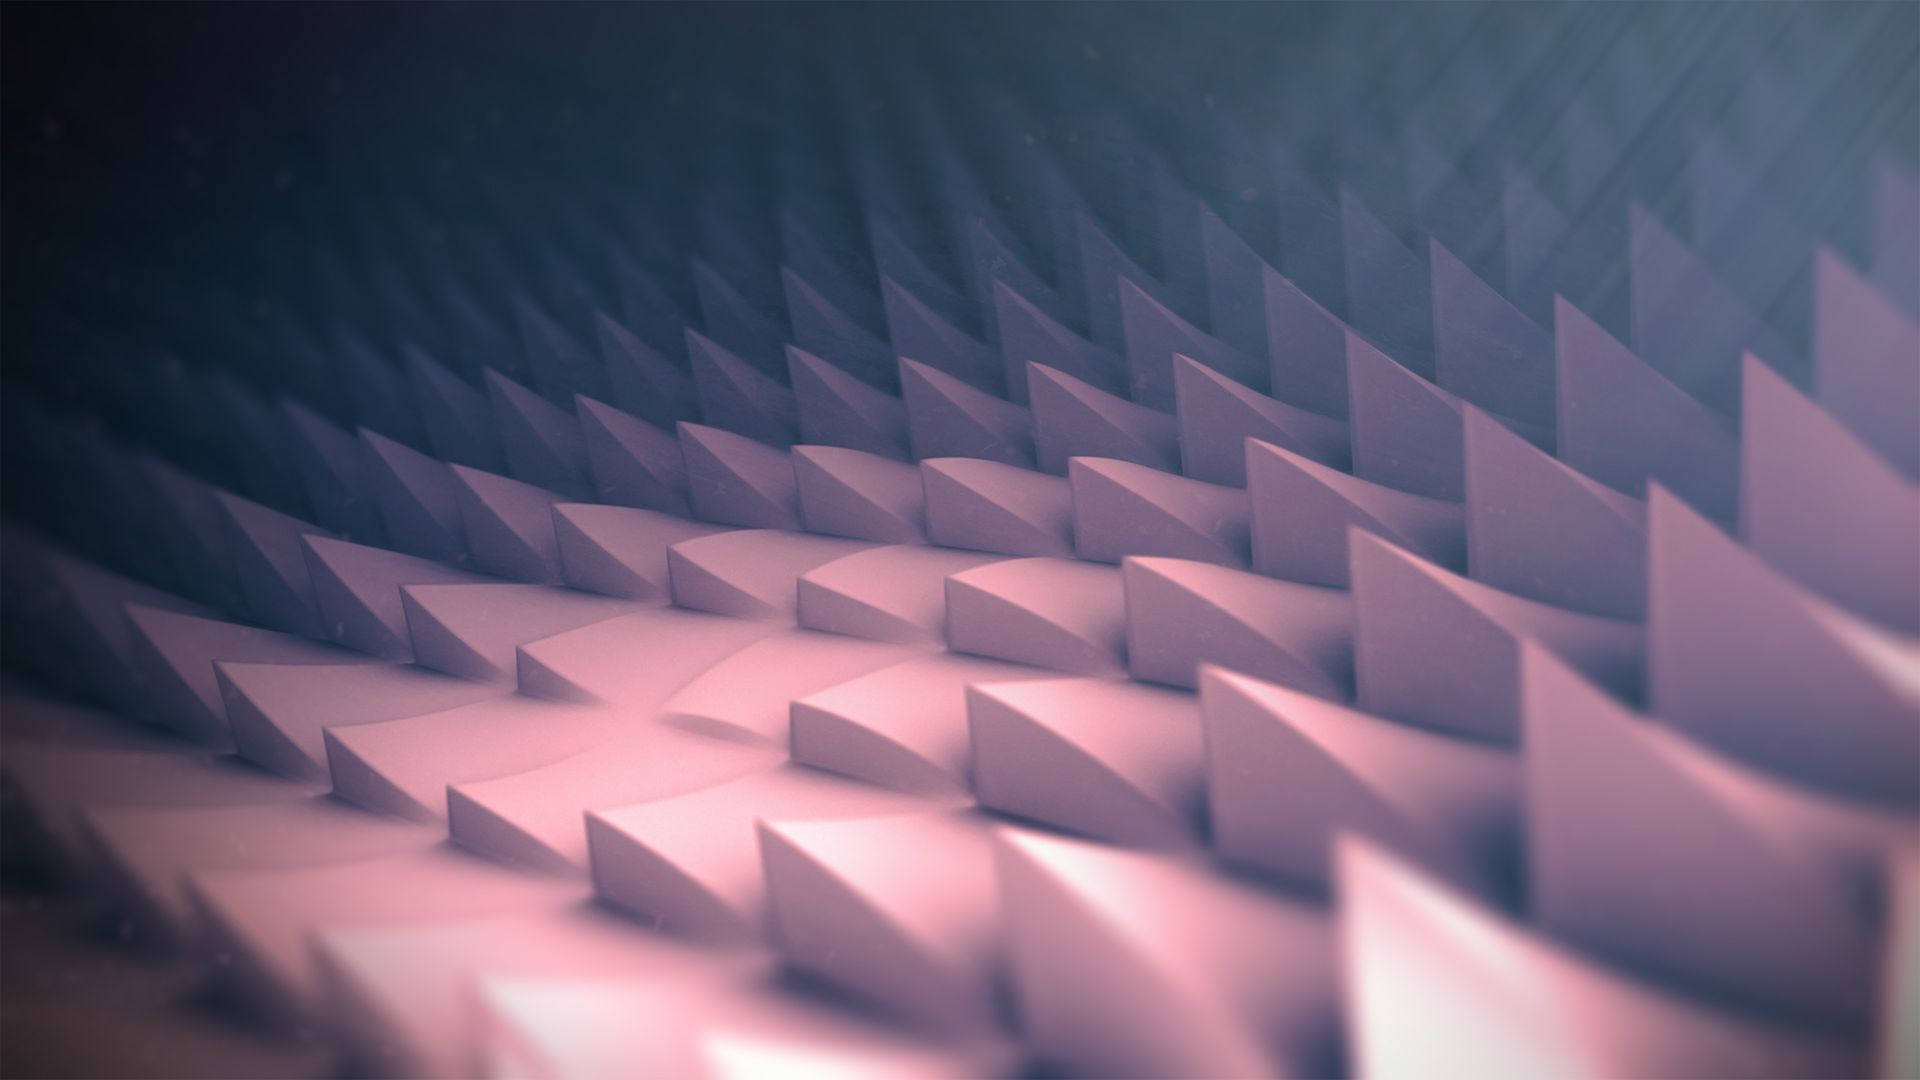 polygons, 3D, 4k, 5k, iphone wallpaper, android wallpaper, abstract, corners, low poly (horizontal)